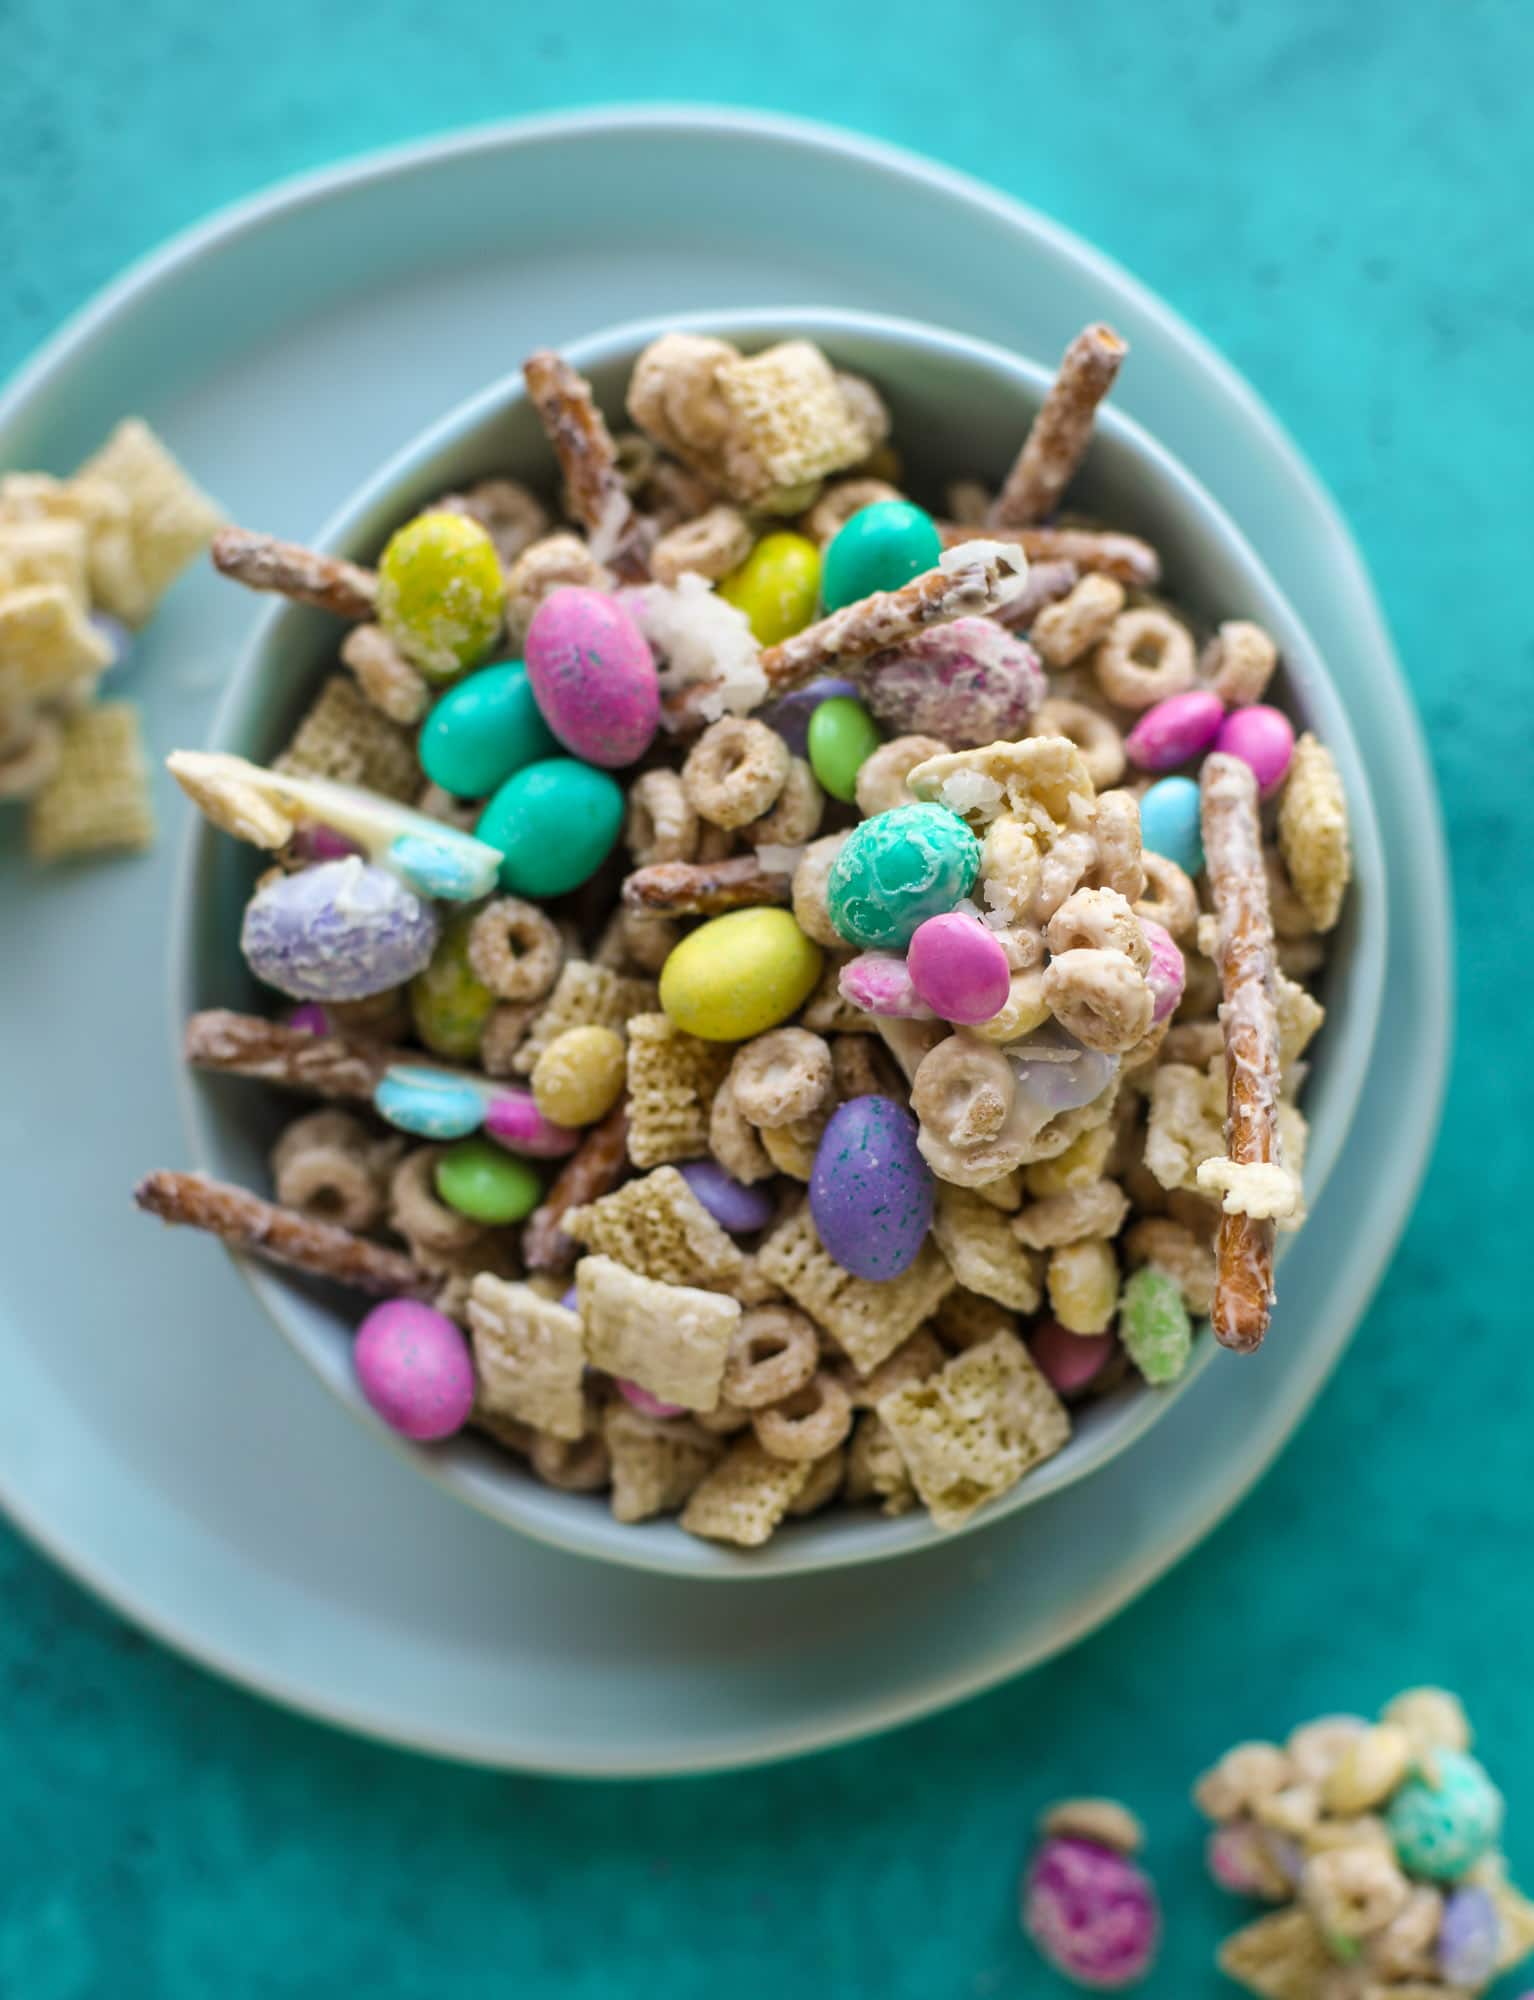 An awesome list of 30 cute Easter foods to make. Dessert, appetizer, and inspiration recipes. Some require cooking, others just chopping.